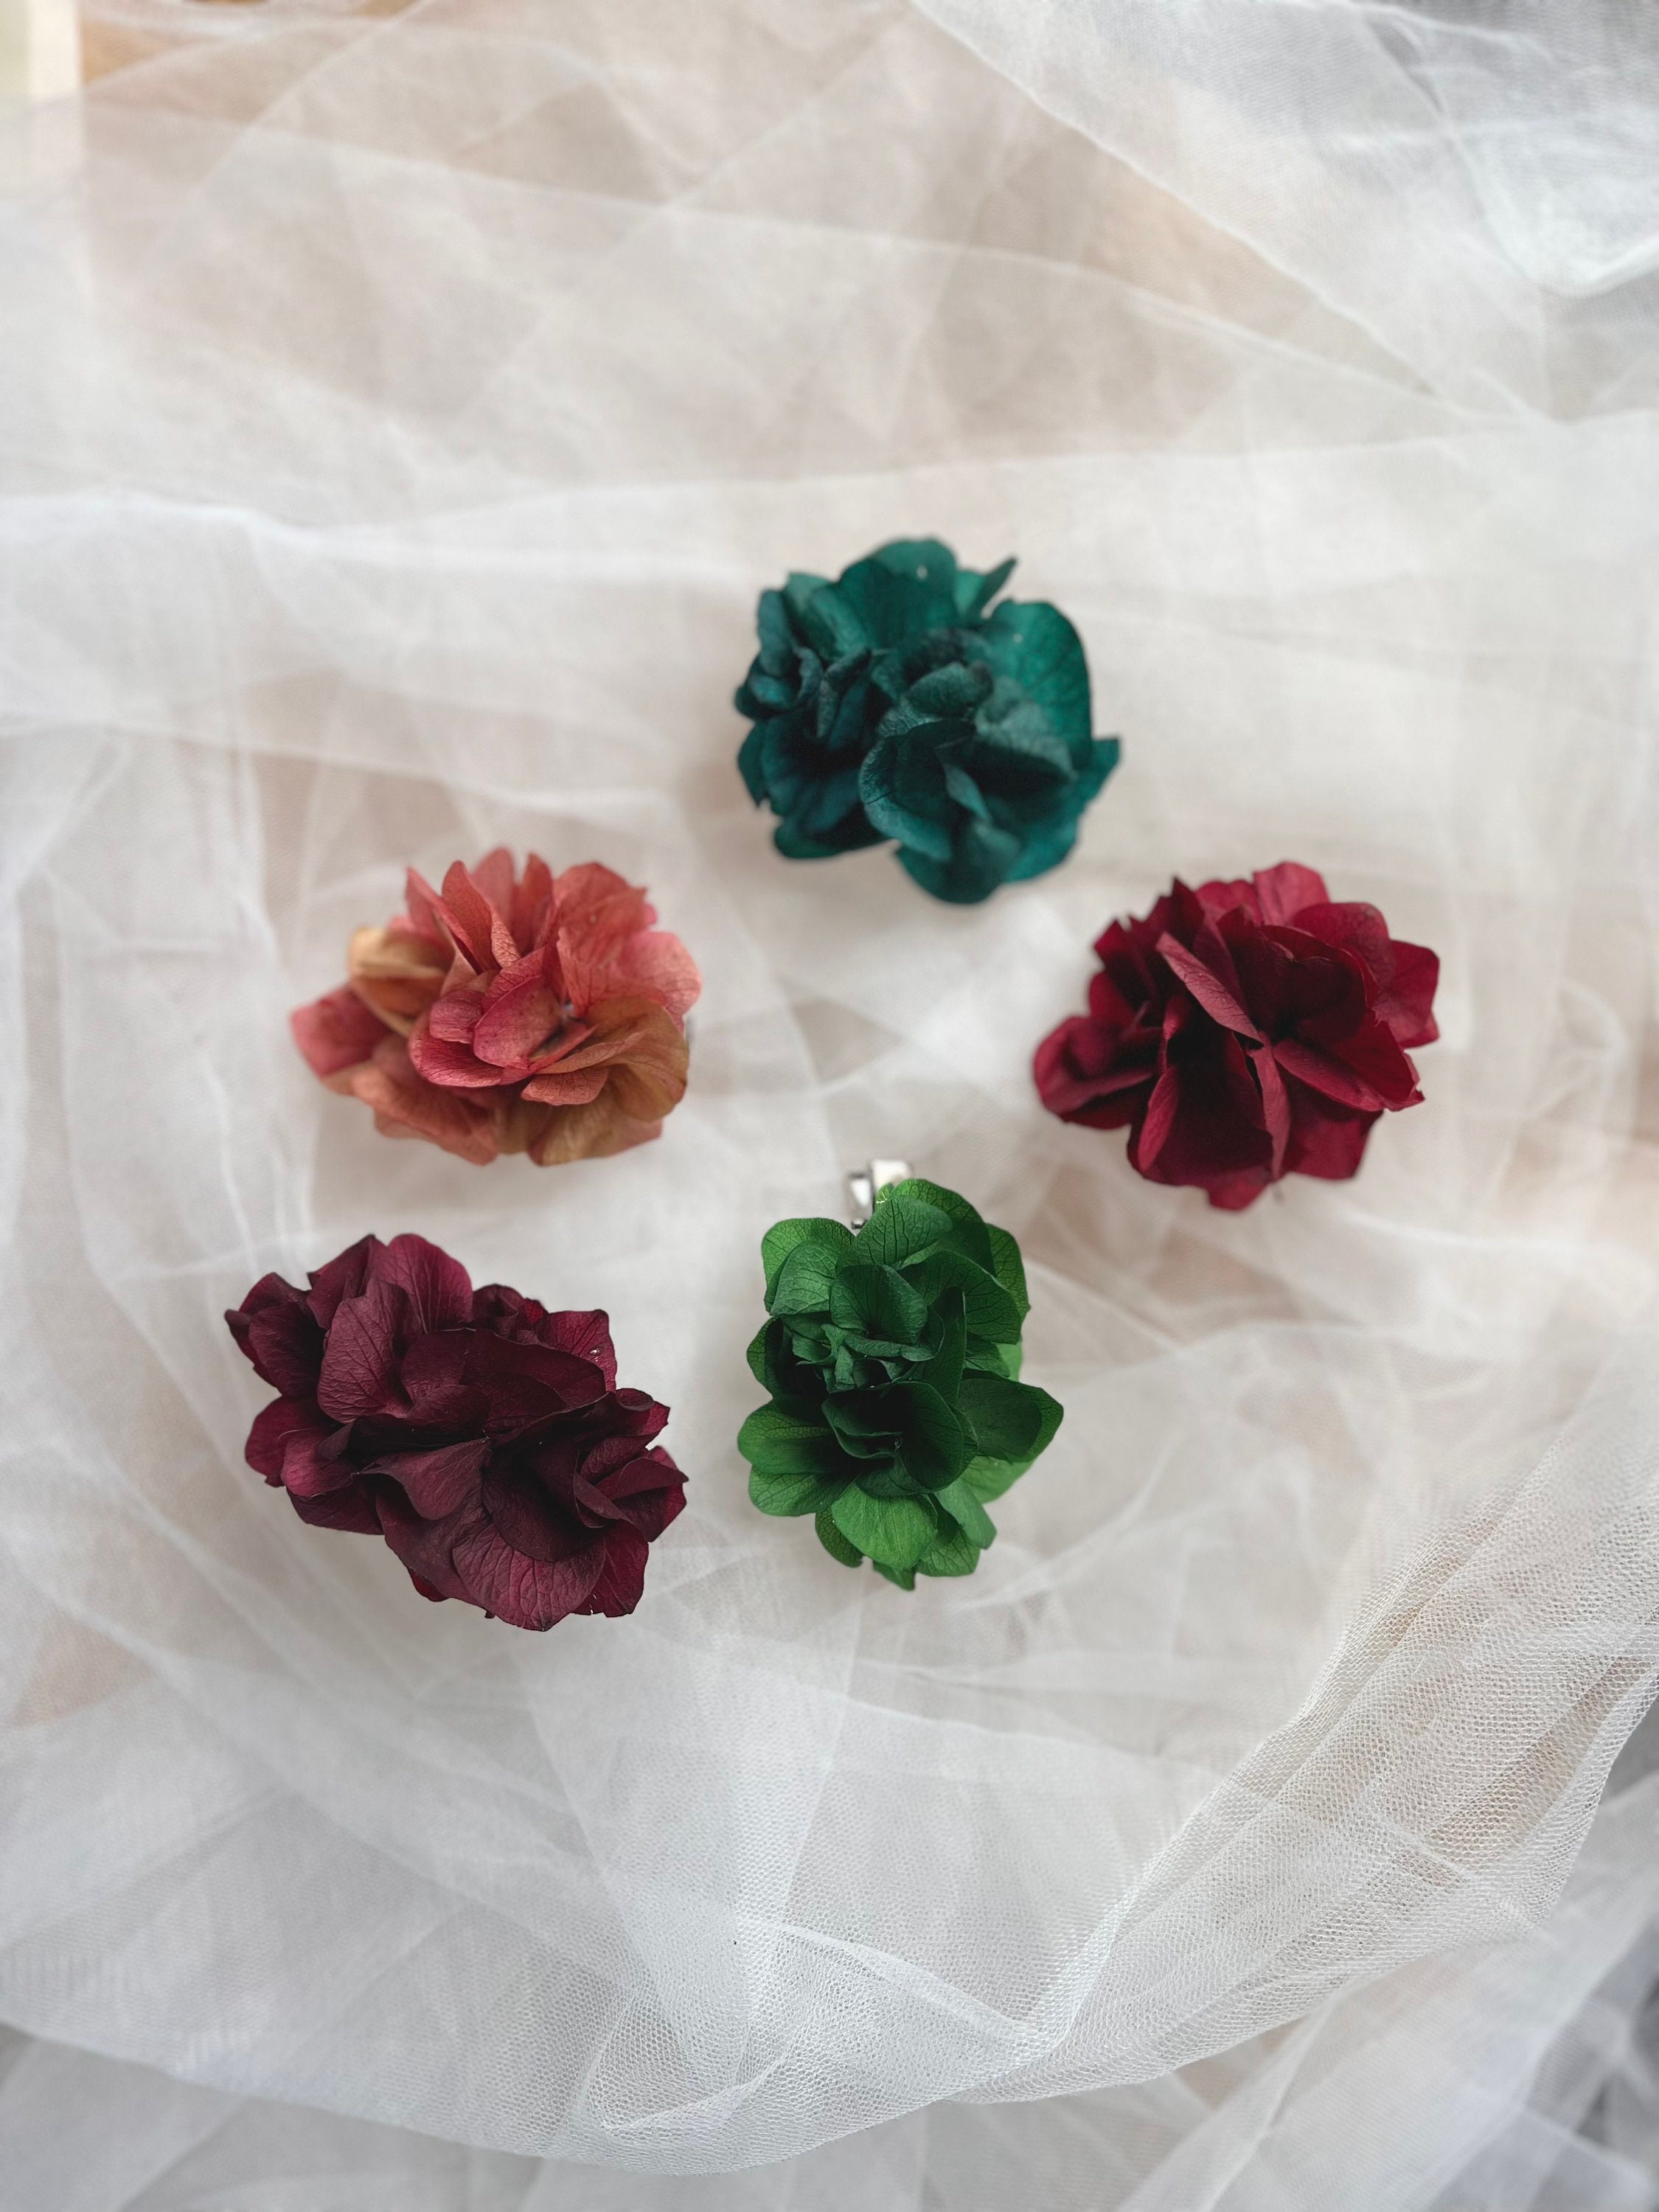 Handmade Bridesmaids Gift Hair Accessories, Dried Flower Clips Red Teal Green Burgundy, Small Floral Piece